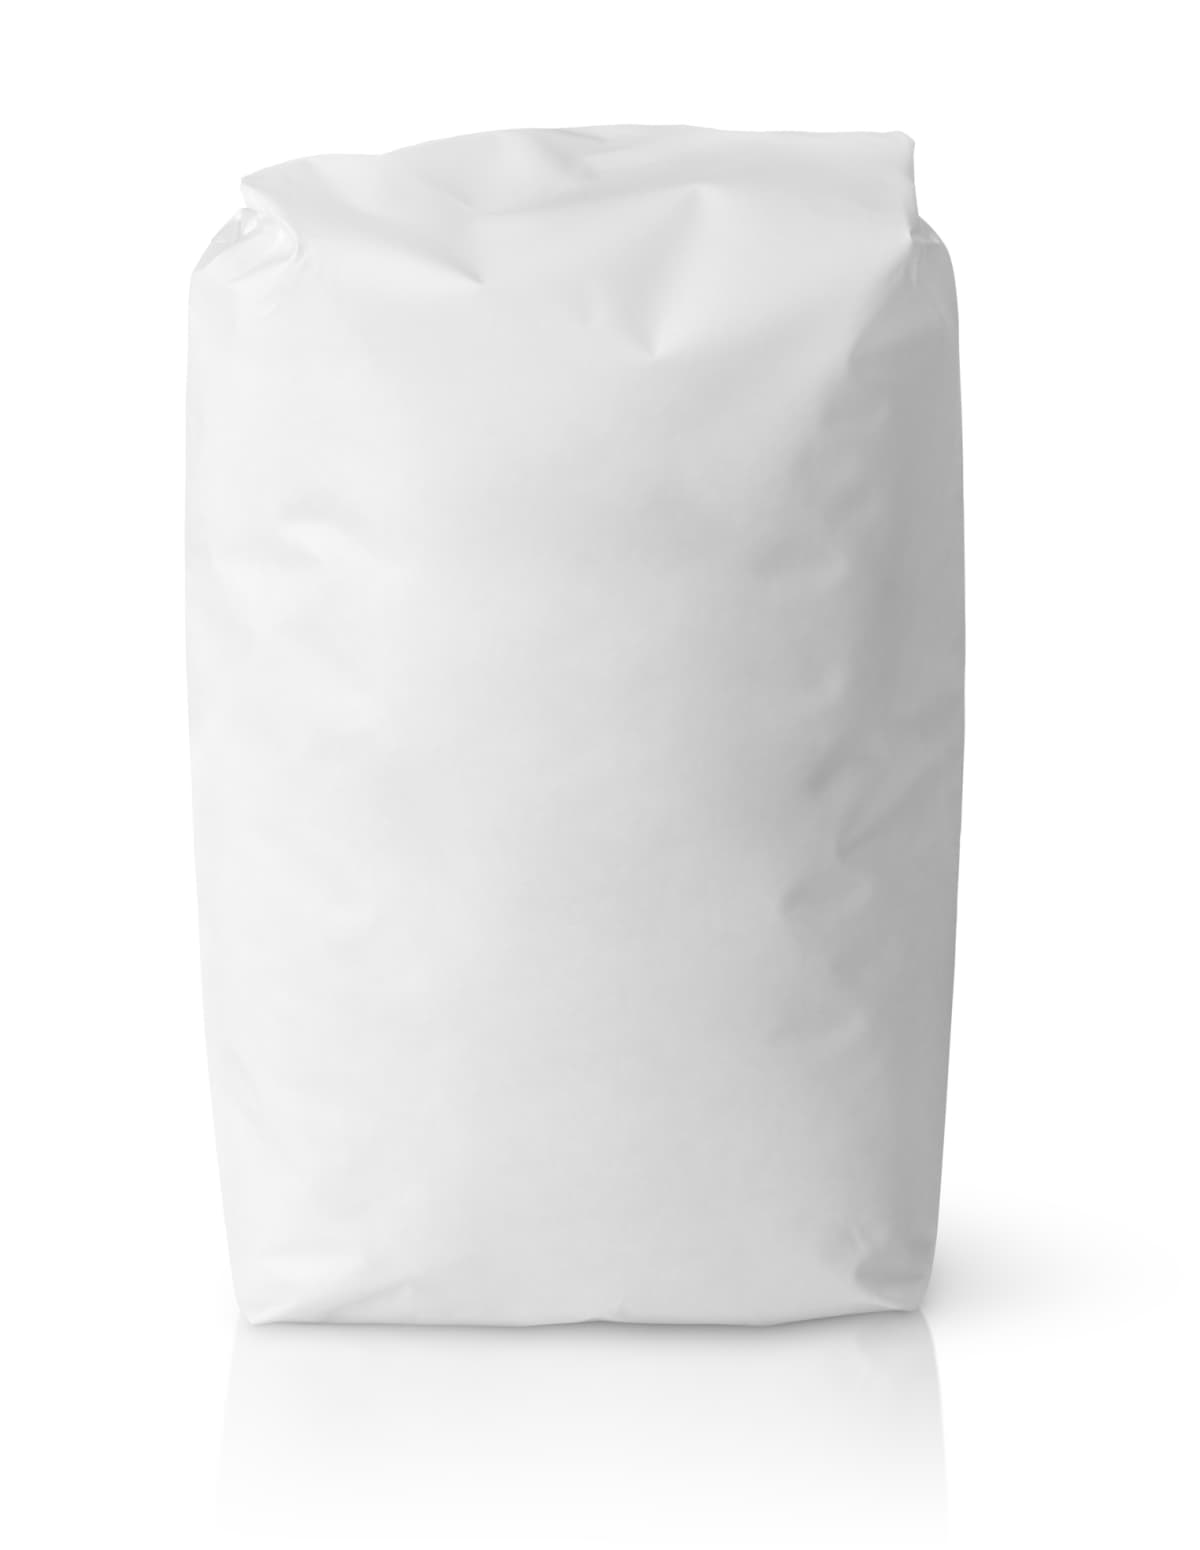 Blank paper bag package of salt isolated on white with clipping path